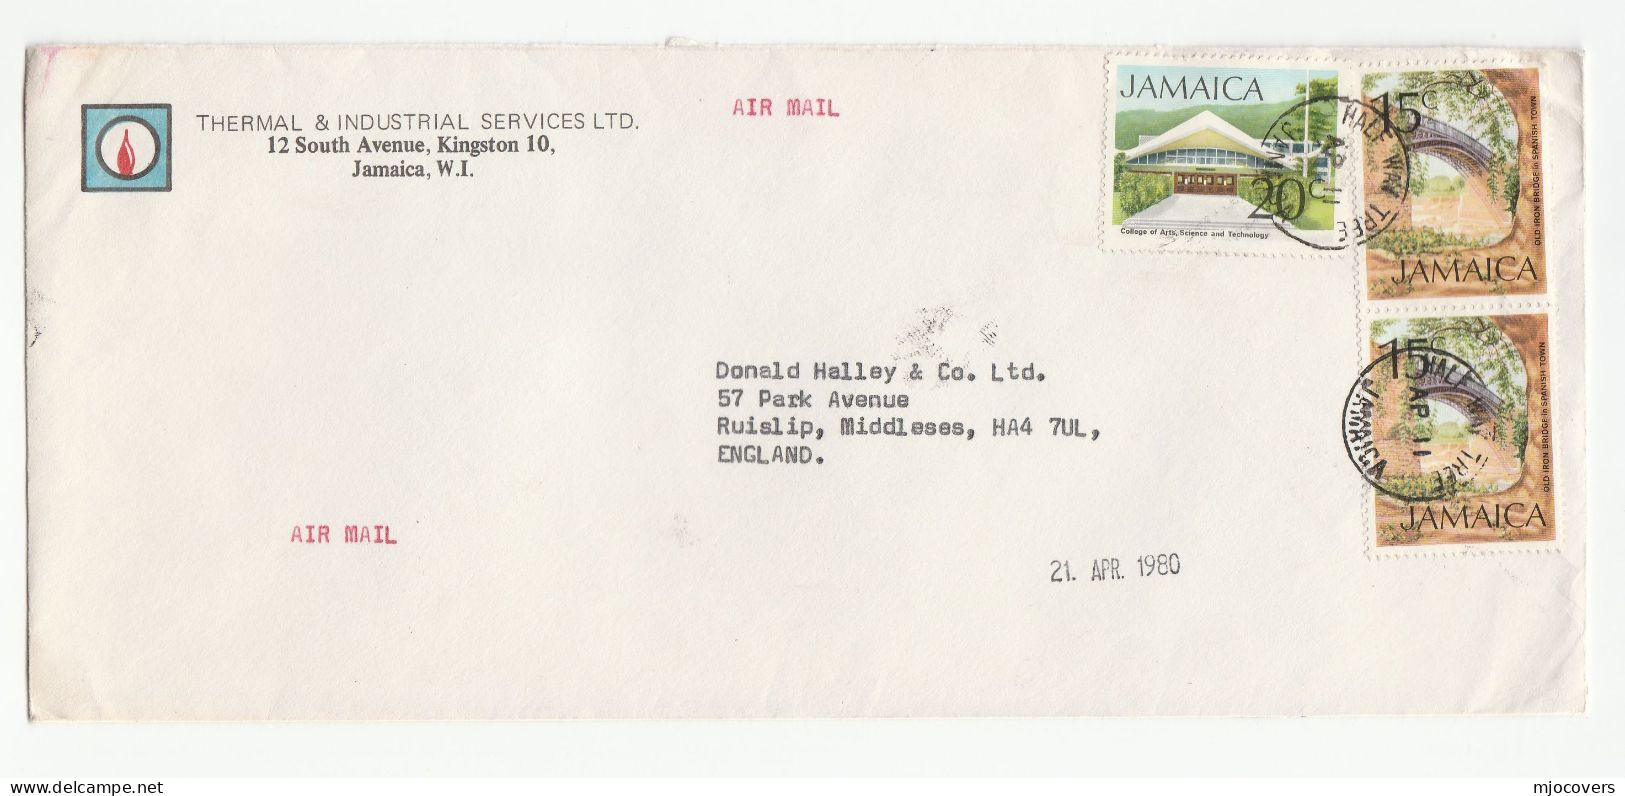 THERMAL ENERGY FLAME Air Mail JAMAICA  1980 Illus ADVERT Cover  Stamps Half Way Tree To GB Energy - Jamaique (1962-...)